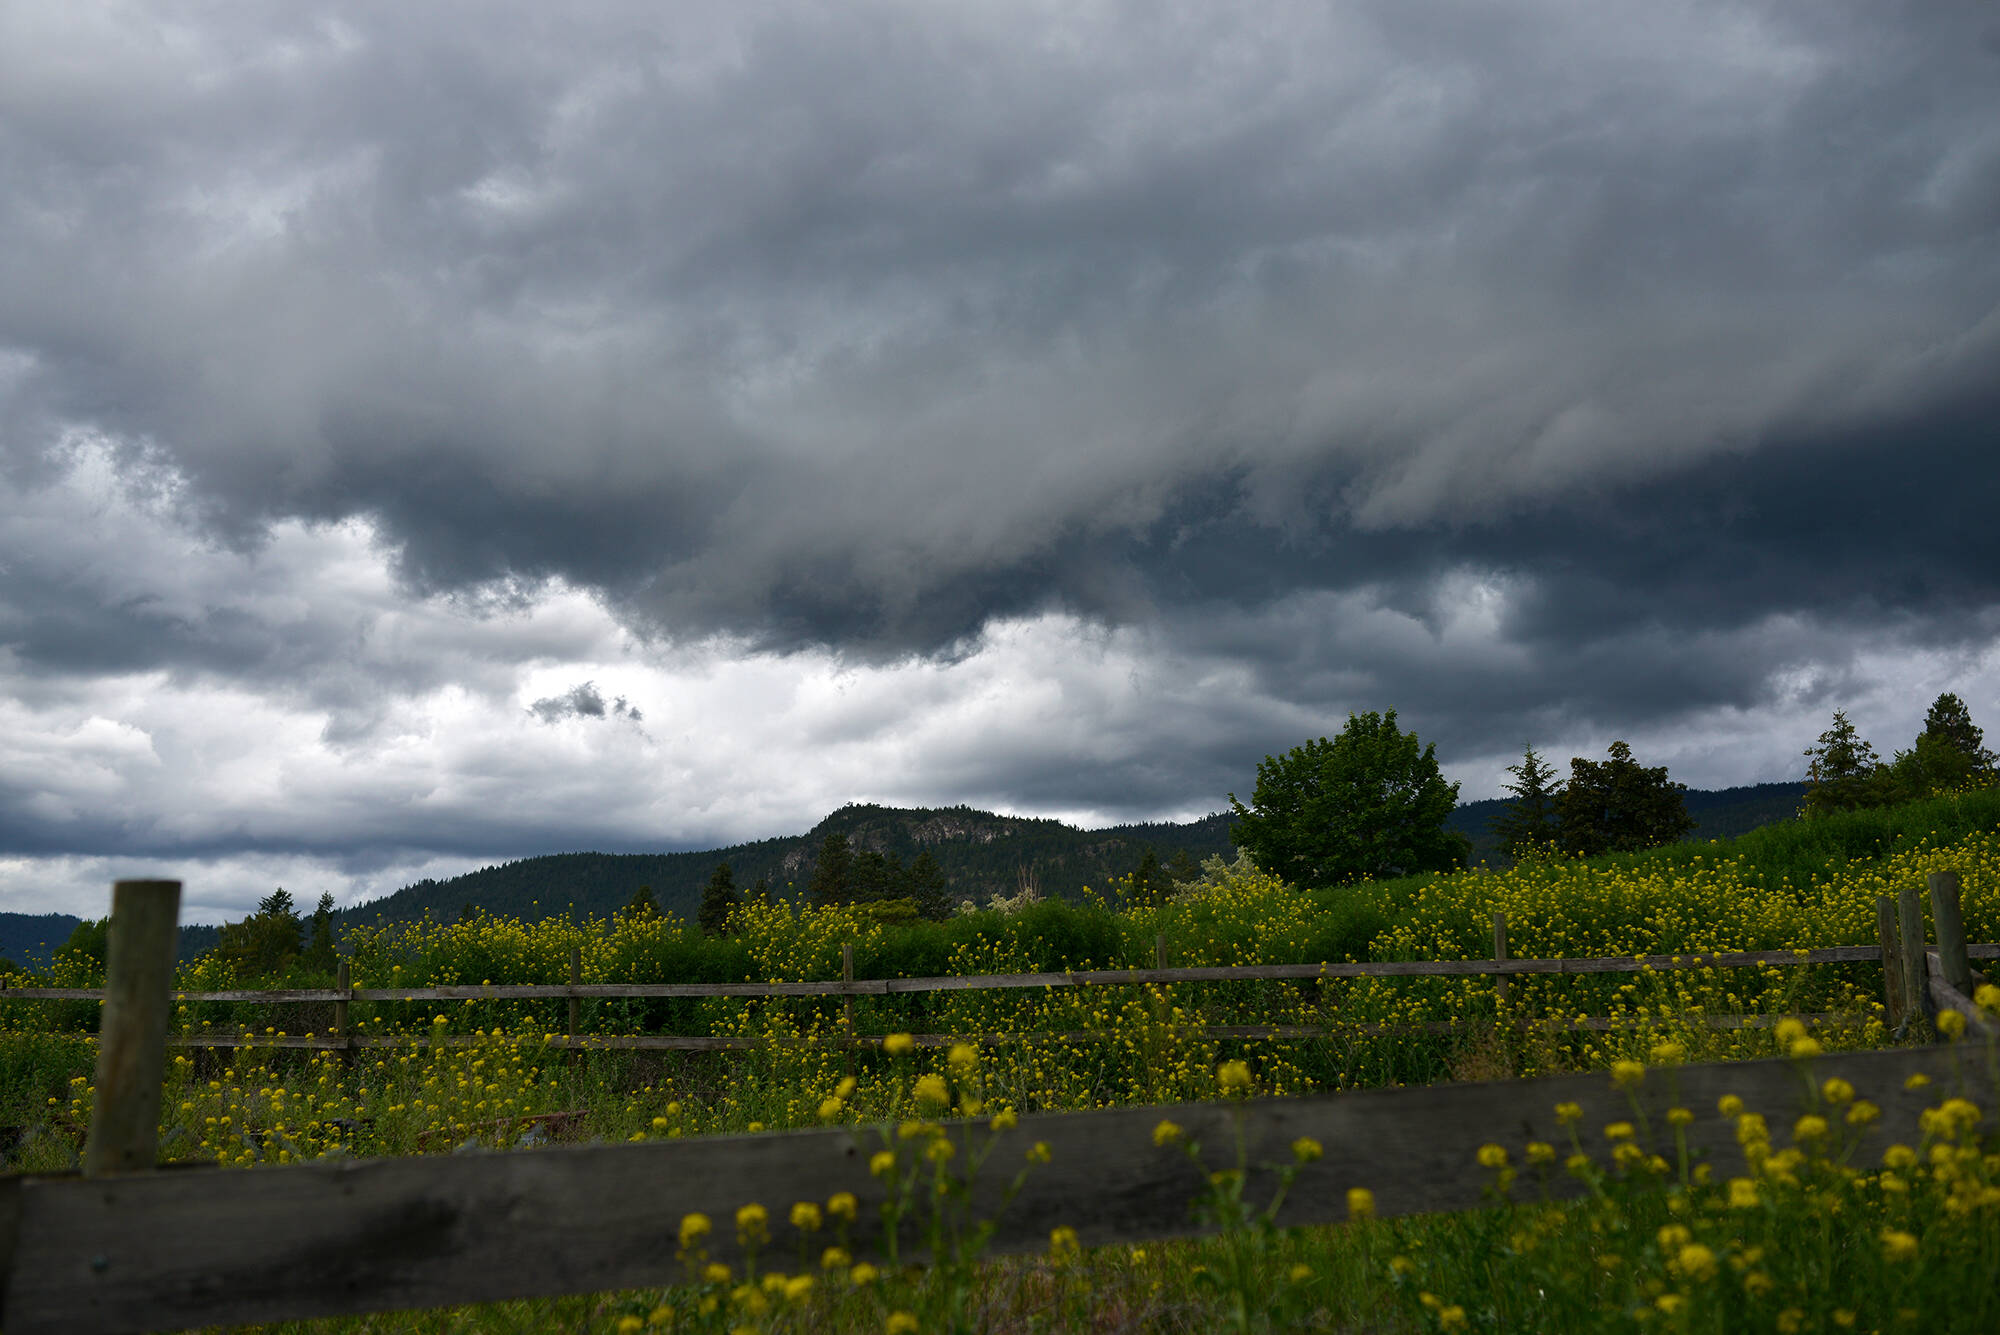 Storm clouds seen in Penticton just before the arrival of a large thunderstorm. (Phil McLachlan - Western News)
Storm clouds seen in Penticton June 12, just before the arrival of a large thunderstorm. (Phil McLachlan - Western News)